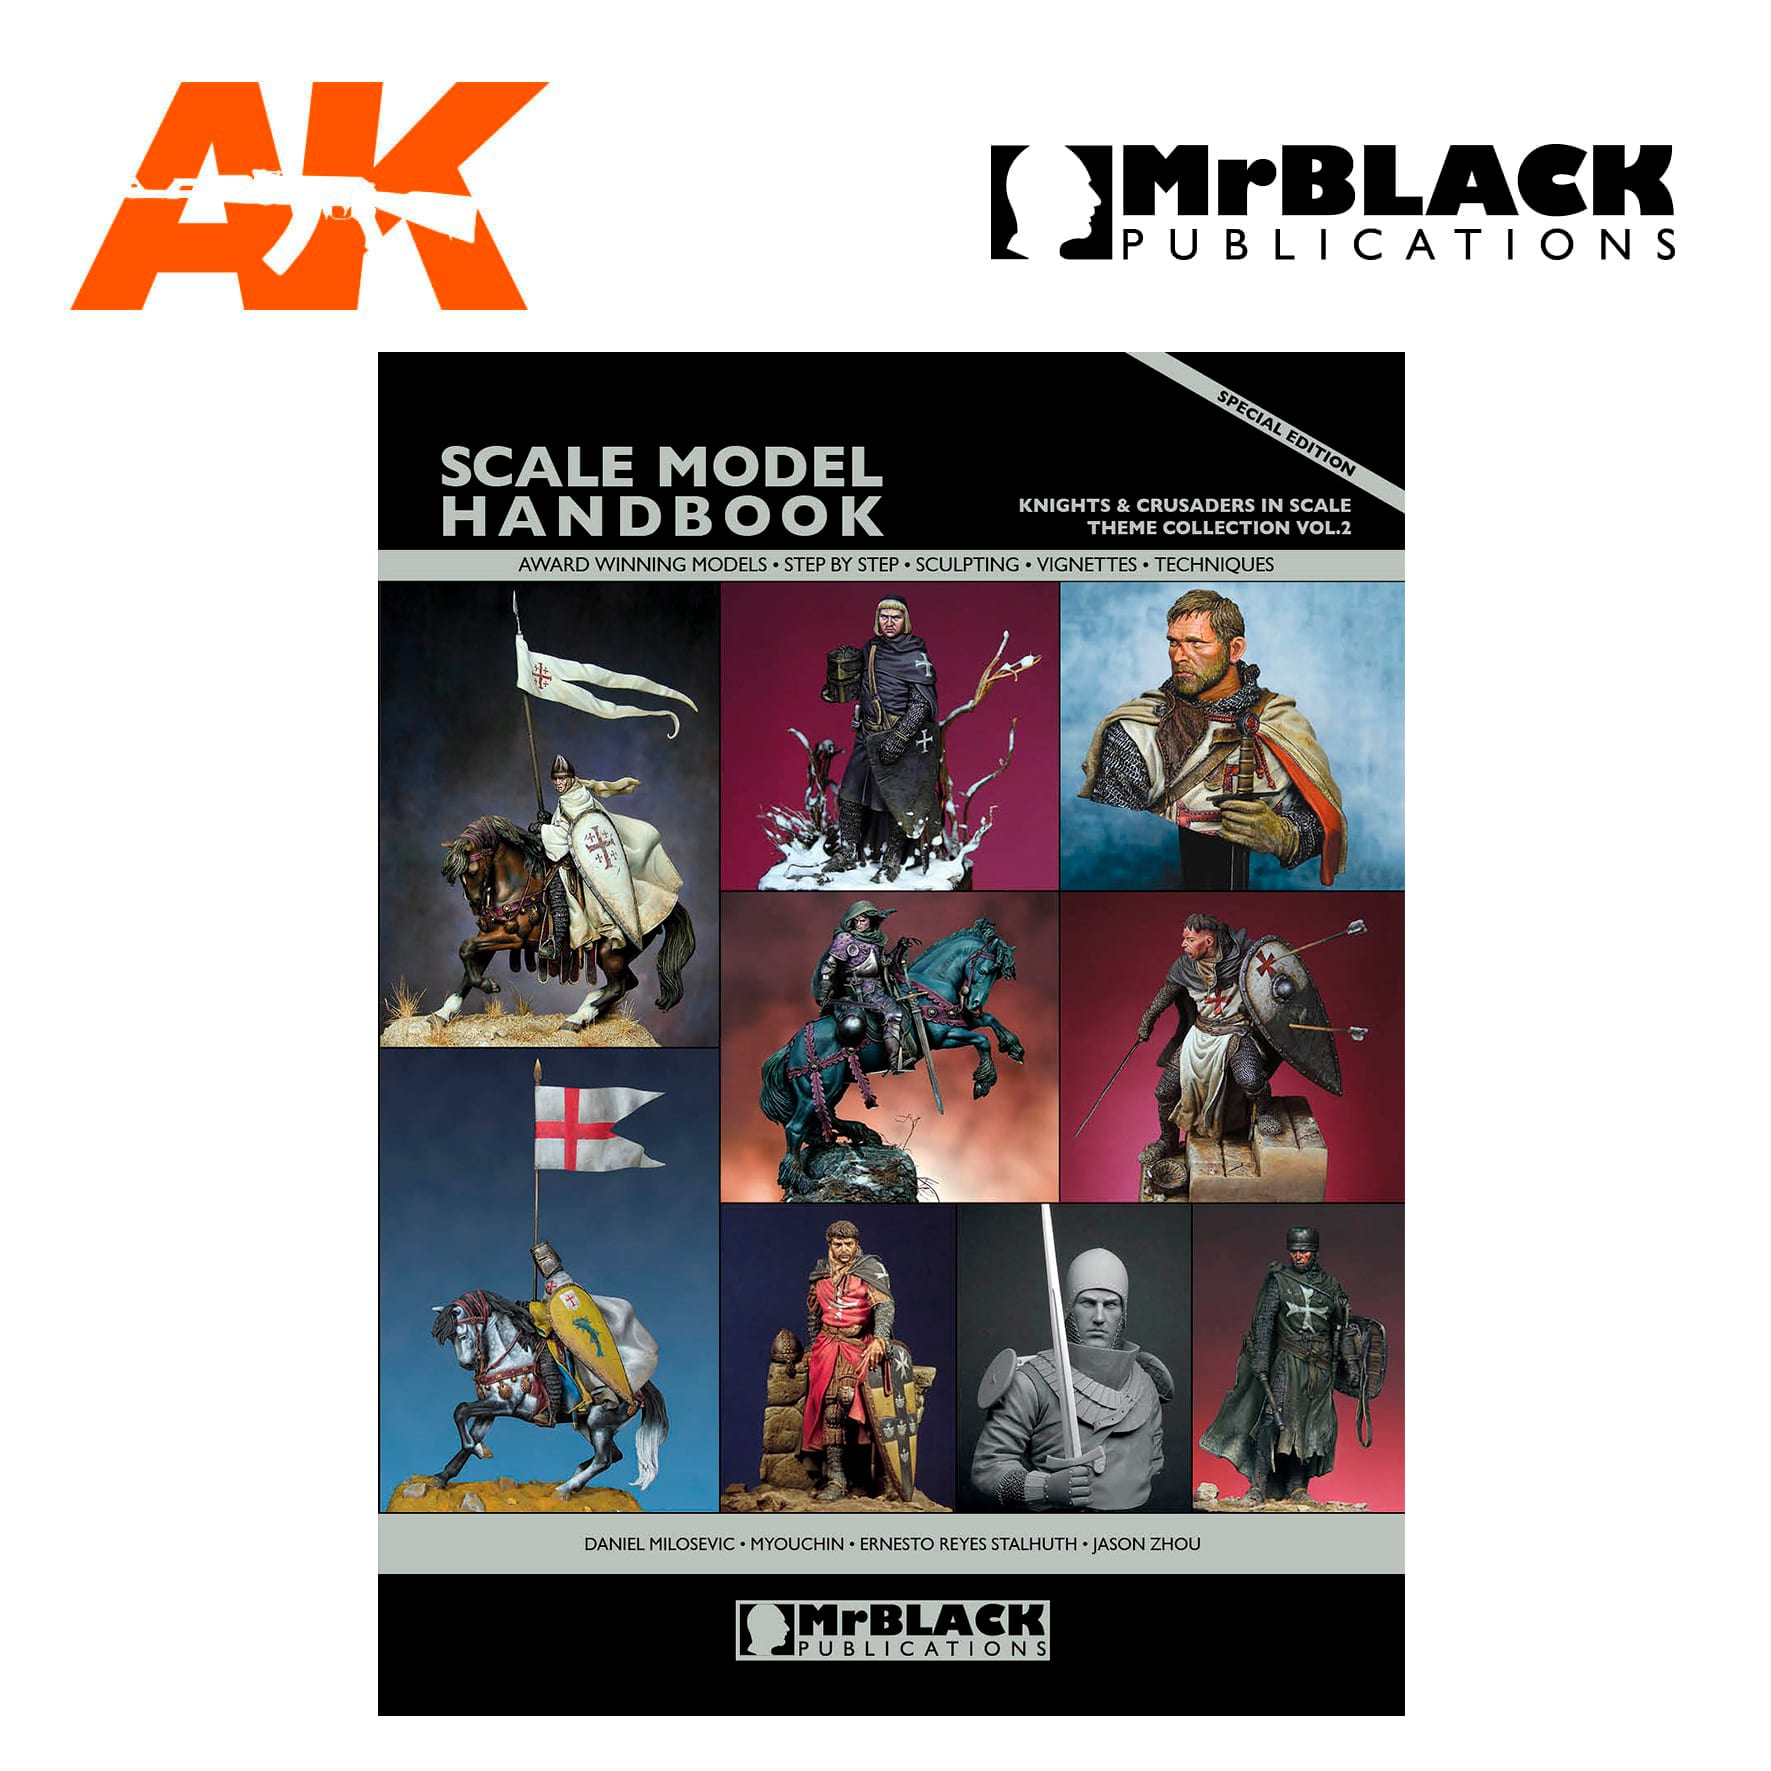 Scale Model Handbook: Knights & Crusaders in Scale, Theme Collection Vol.2